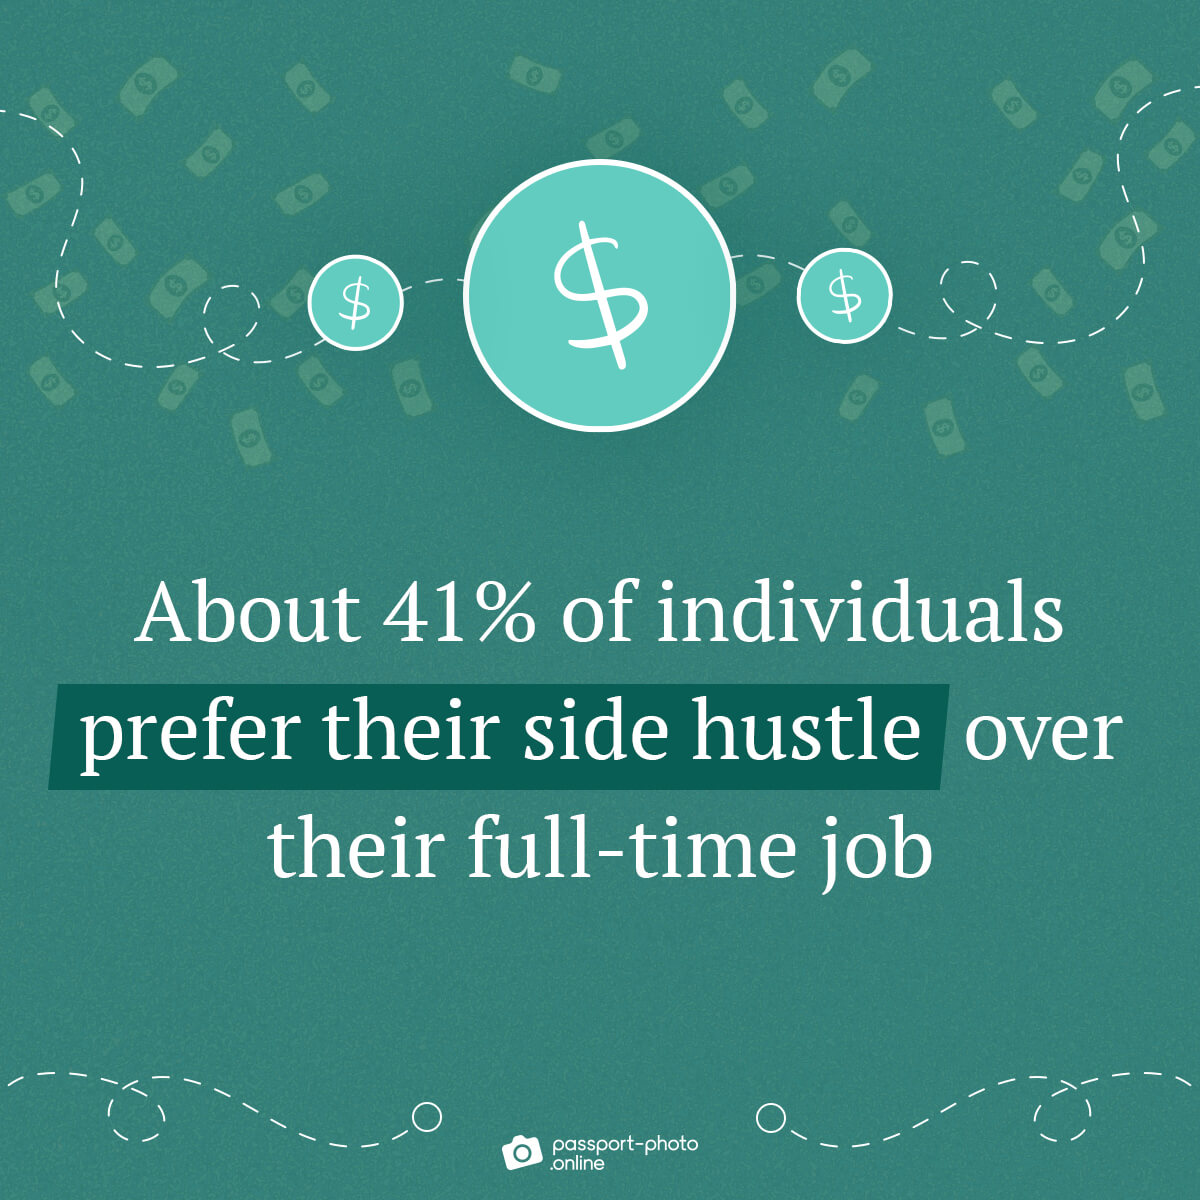 About 41% of individuals prefer their side hustle over their full-time job